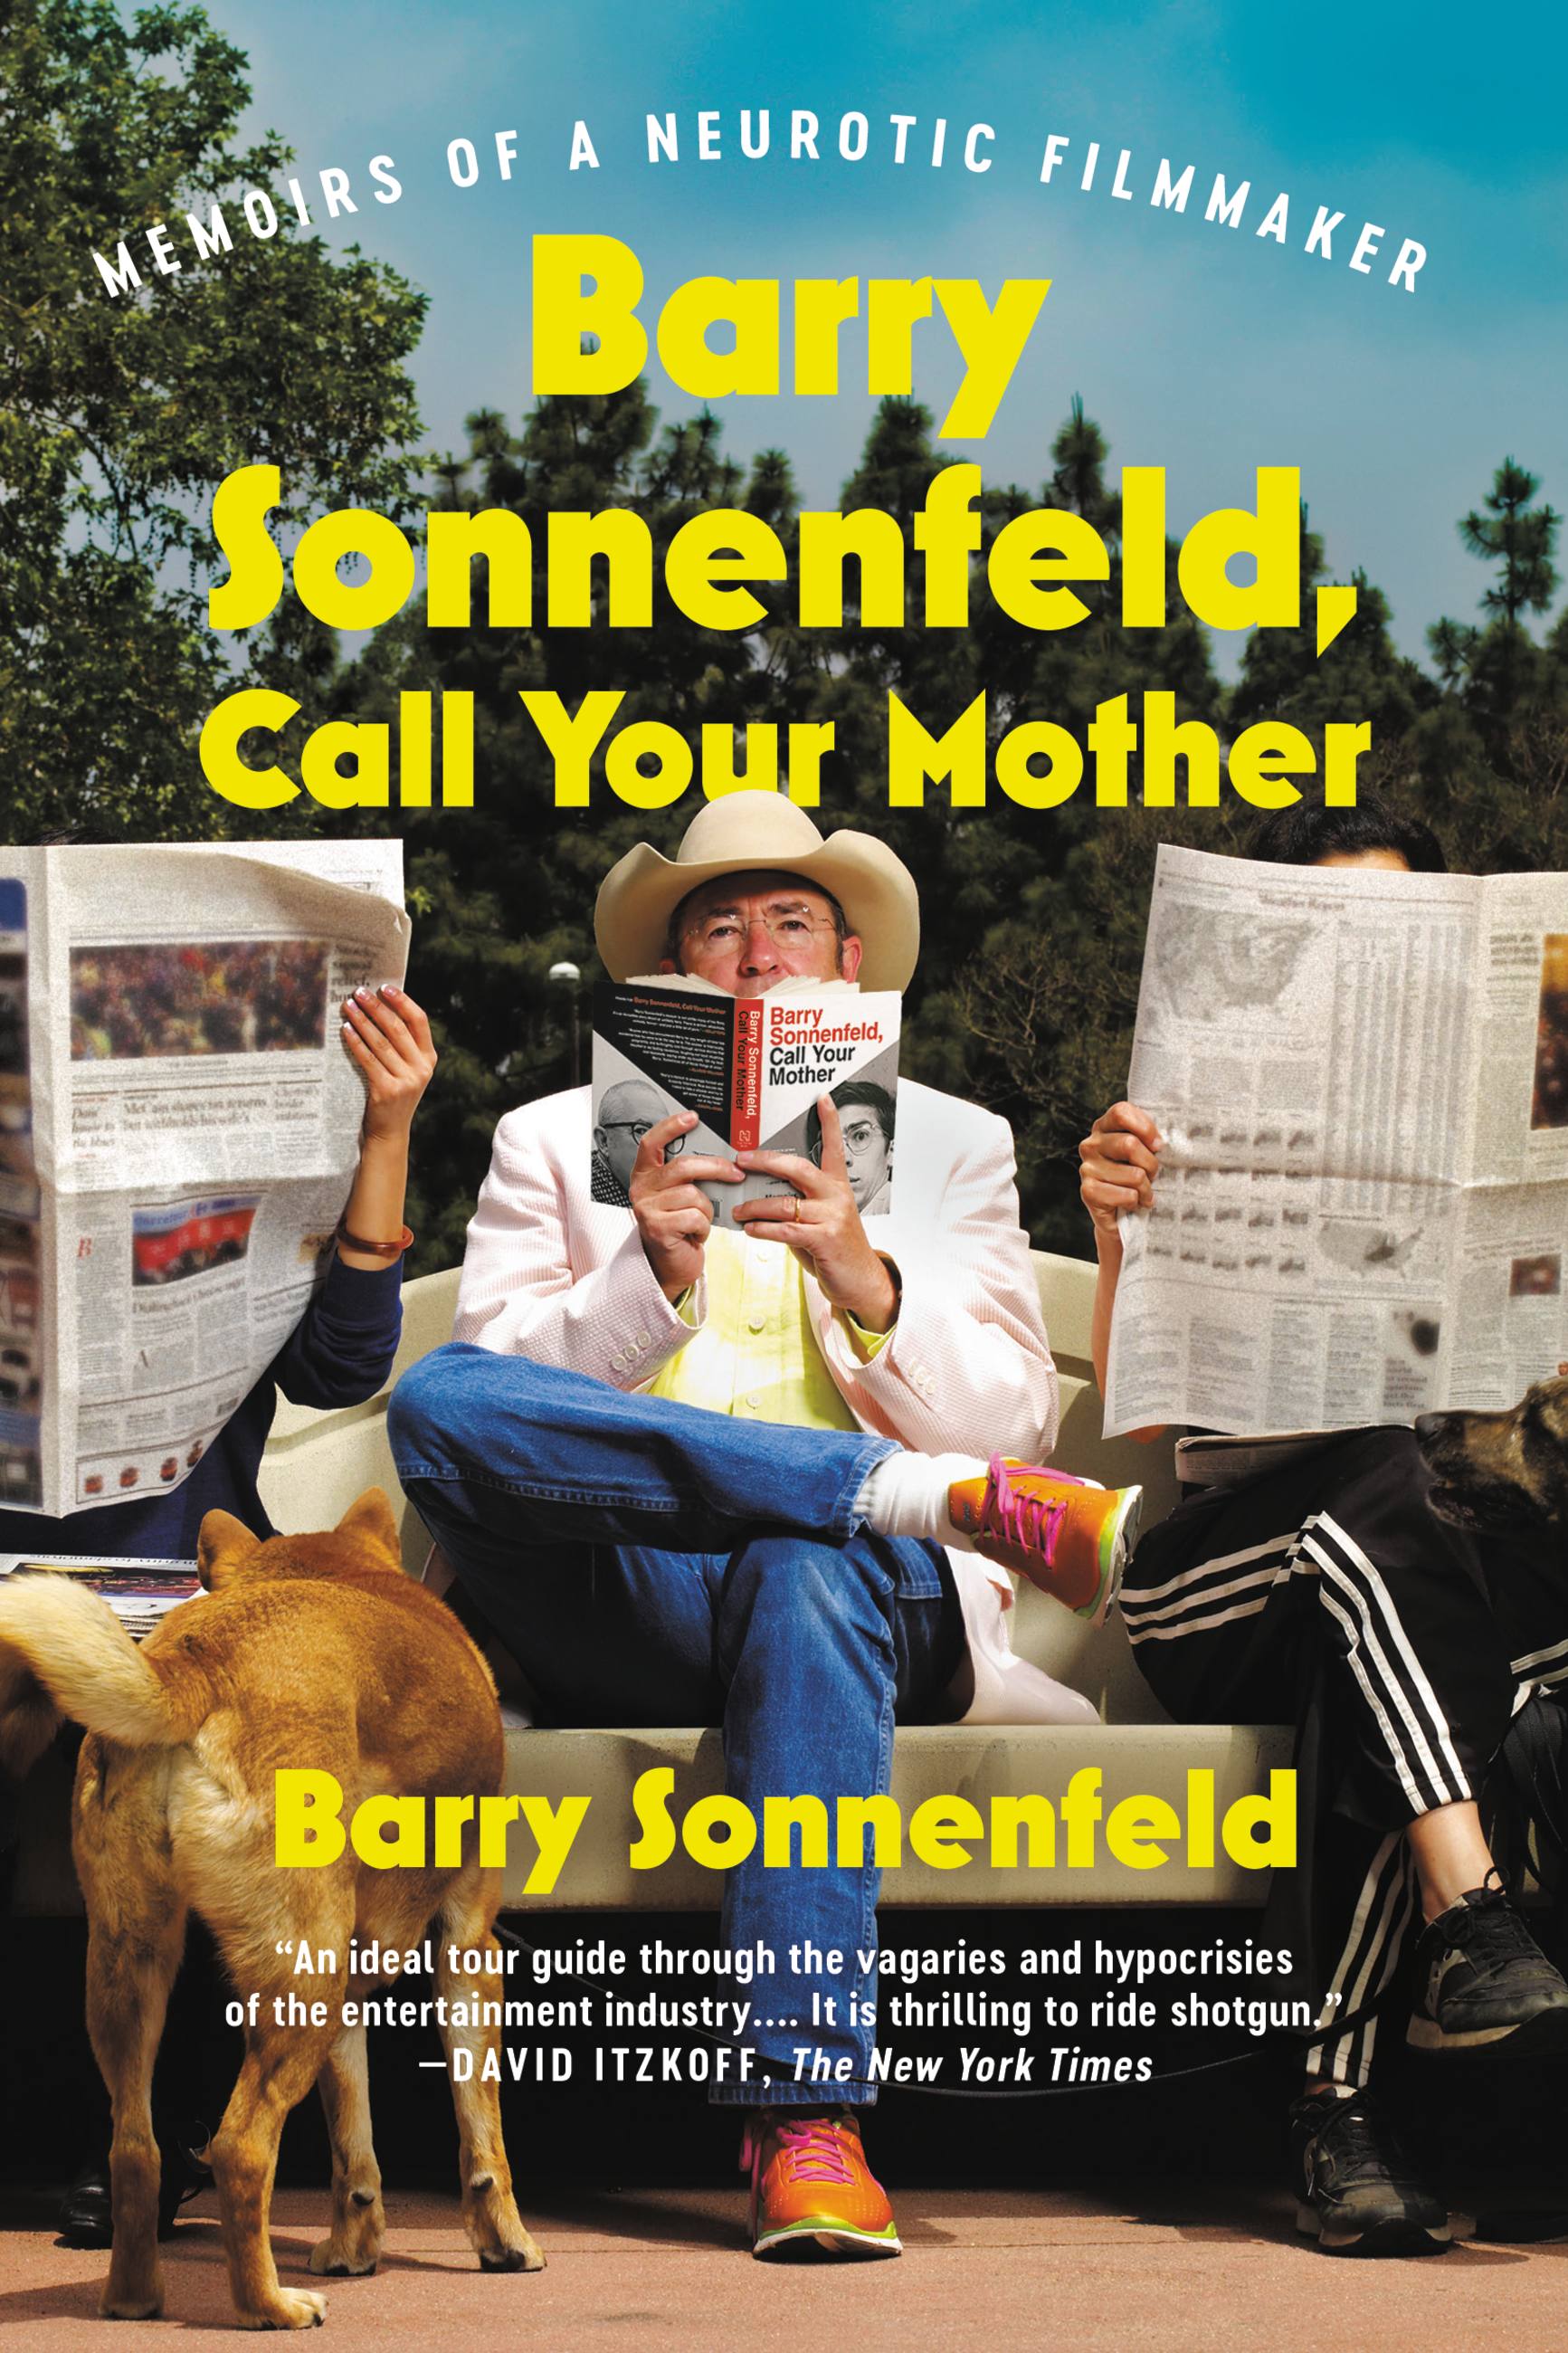 Unconscious Forced Porn - Barry Sonnenfeld, Call Your Mother by Barry Sonnenfeld | Hachette Book Group